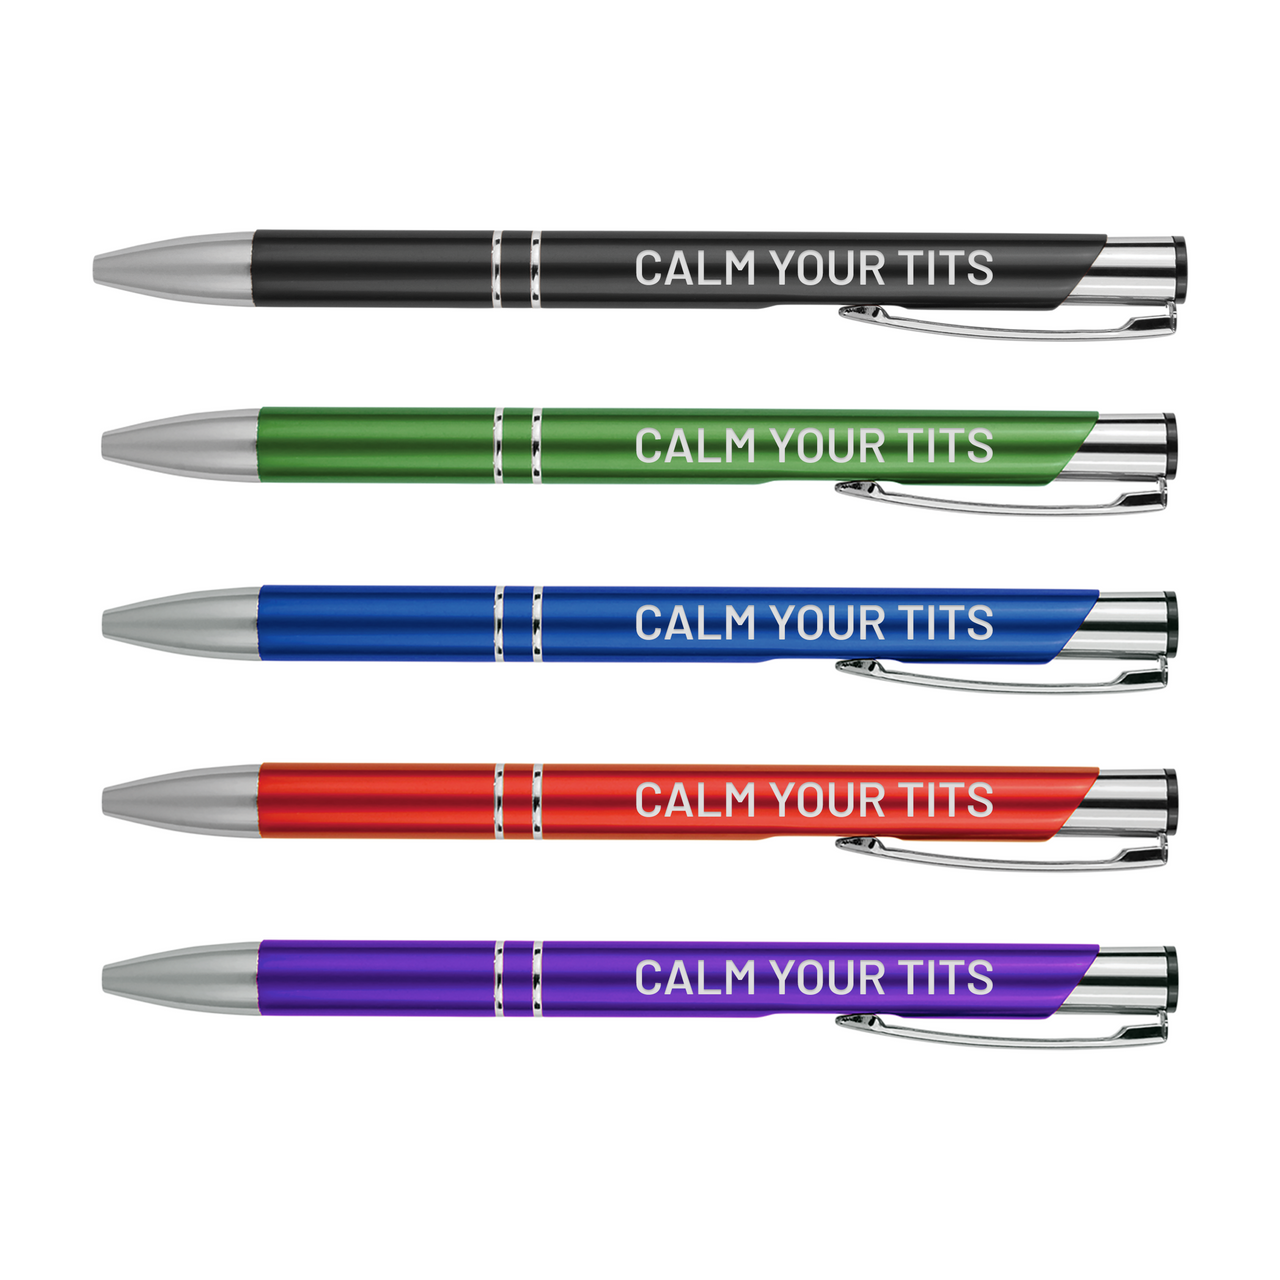 Calm Your Tits Metal Pens | Motivational Writing Tools Office Supplies Coworker Gifts Stocking Stuffer Baum Designs